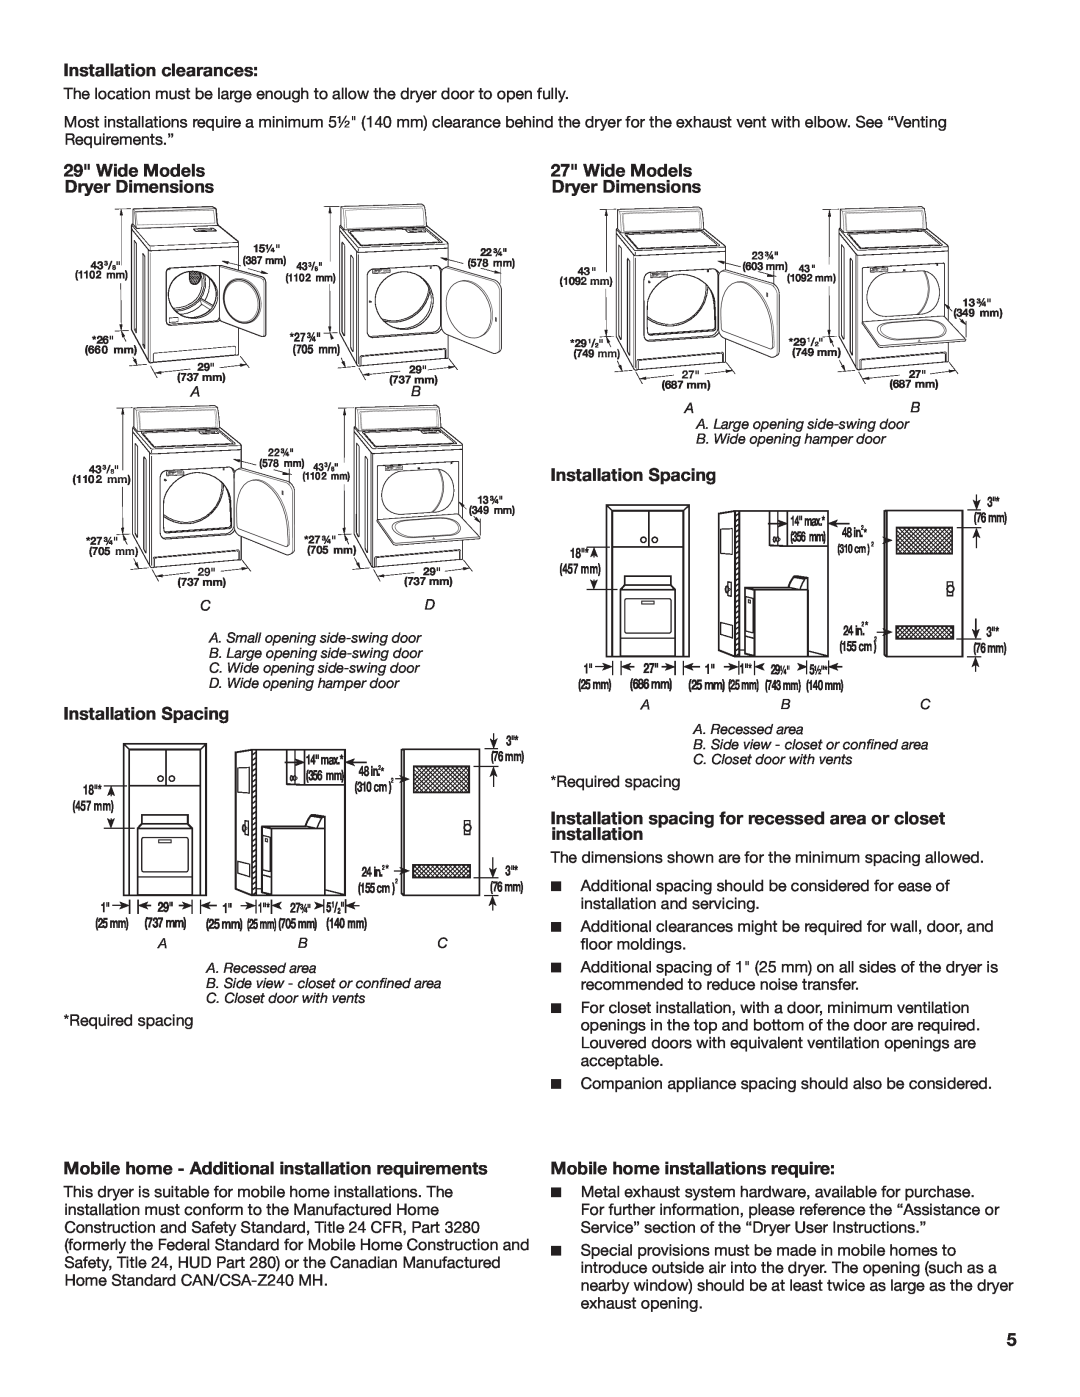 Maytag MGDC500VW, W10296136A-SP Installation clearances, Wide Models, Dryer Dimensions, Installation Spacing, installation 